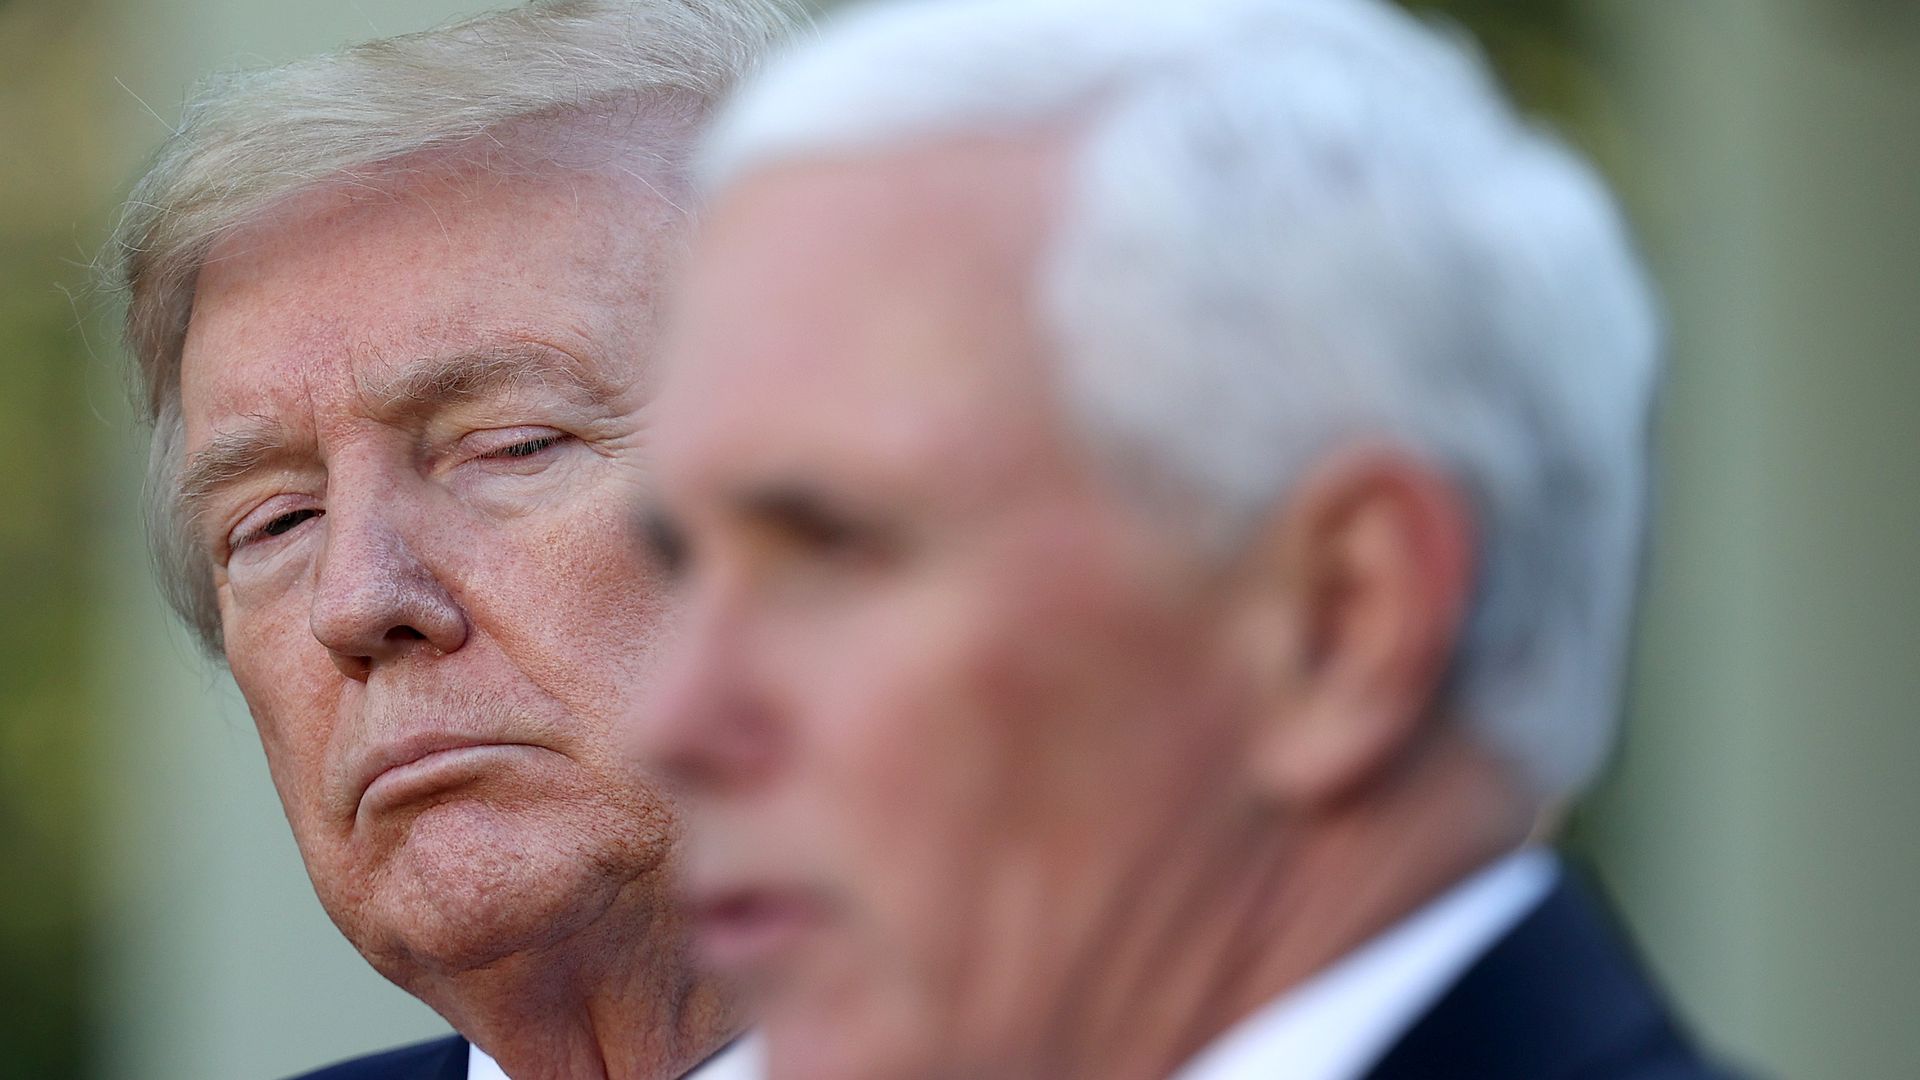 Picture of Trump looking at Pence